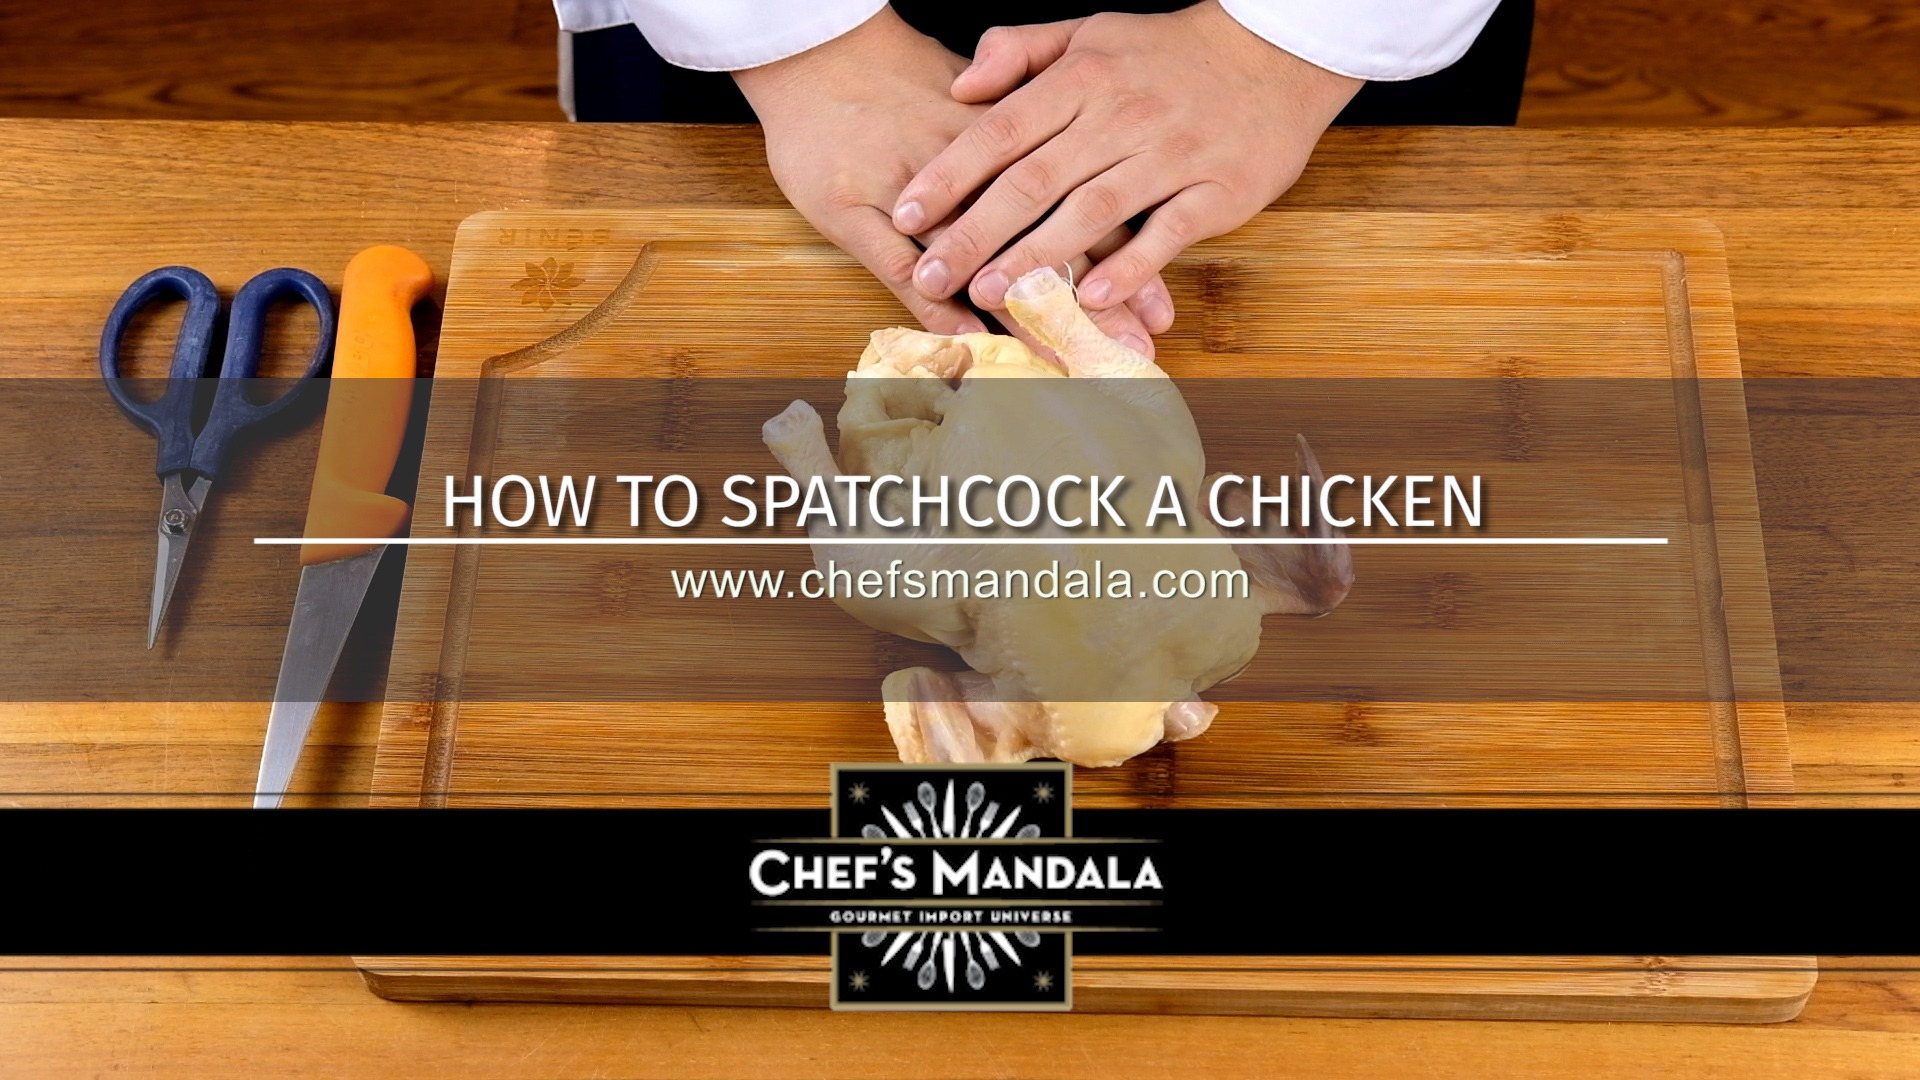 HOW TO SPATCHCOCK A CHICKEN